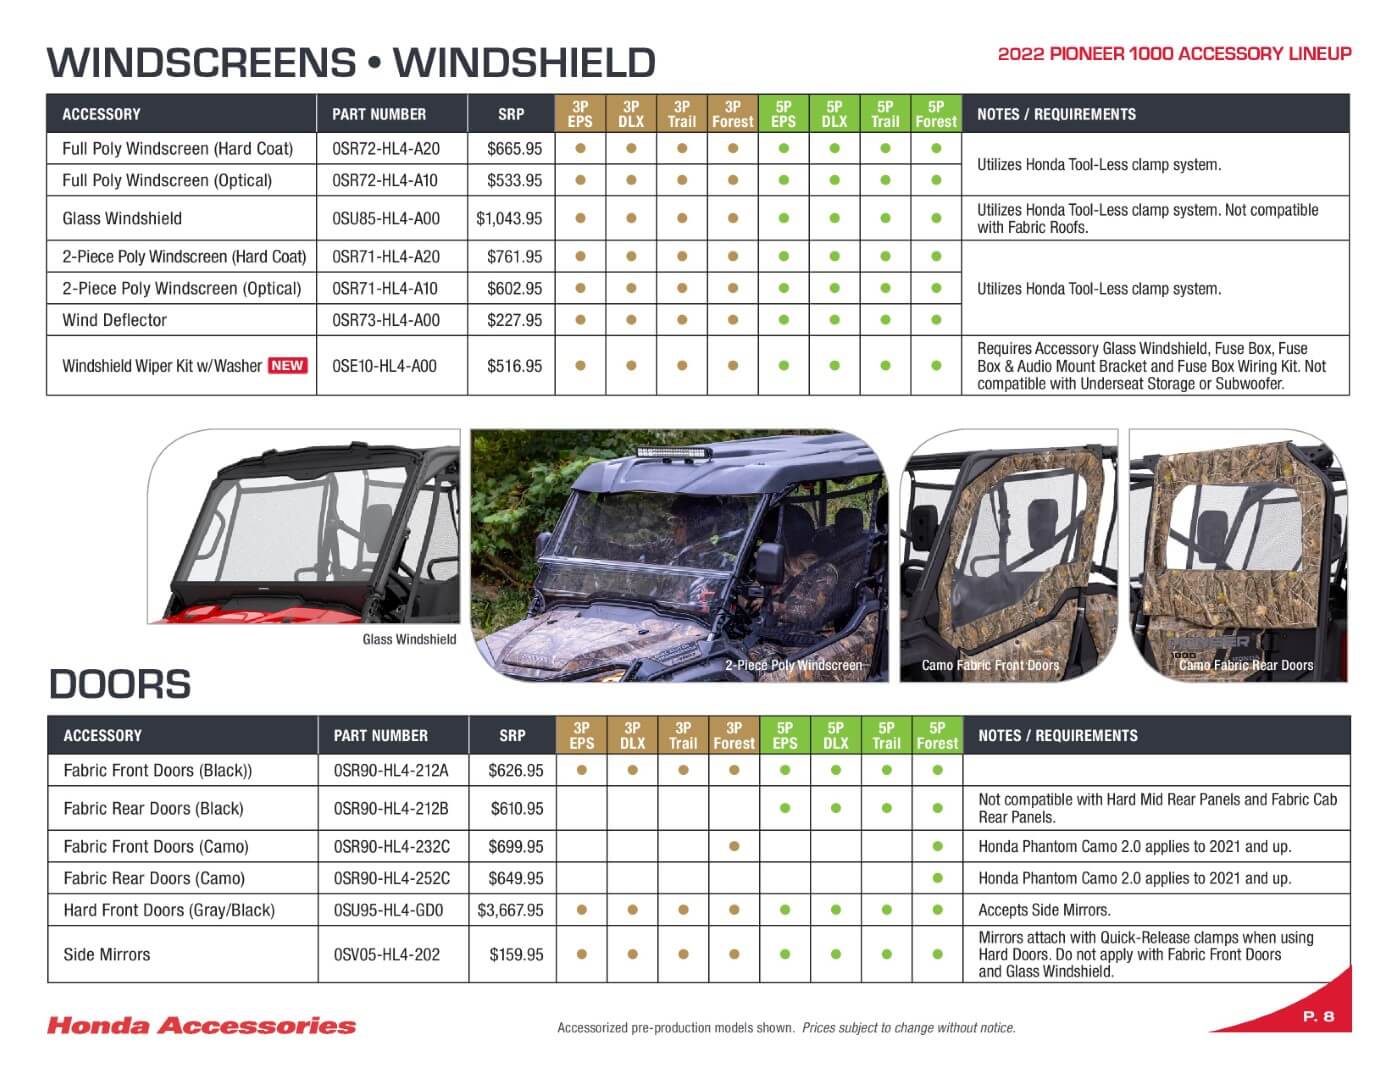 2022 Honda Pioneer 1000 Accessory Catalog / Accessories | Page 8 (including Pioneer 1000-5 Accessories)